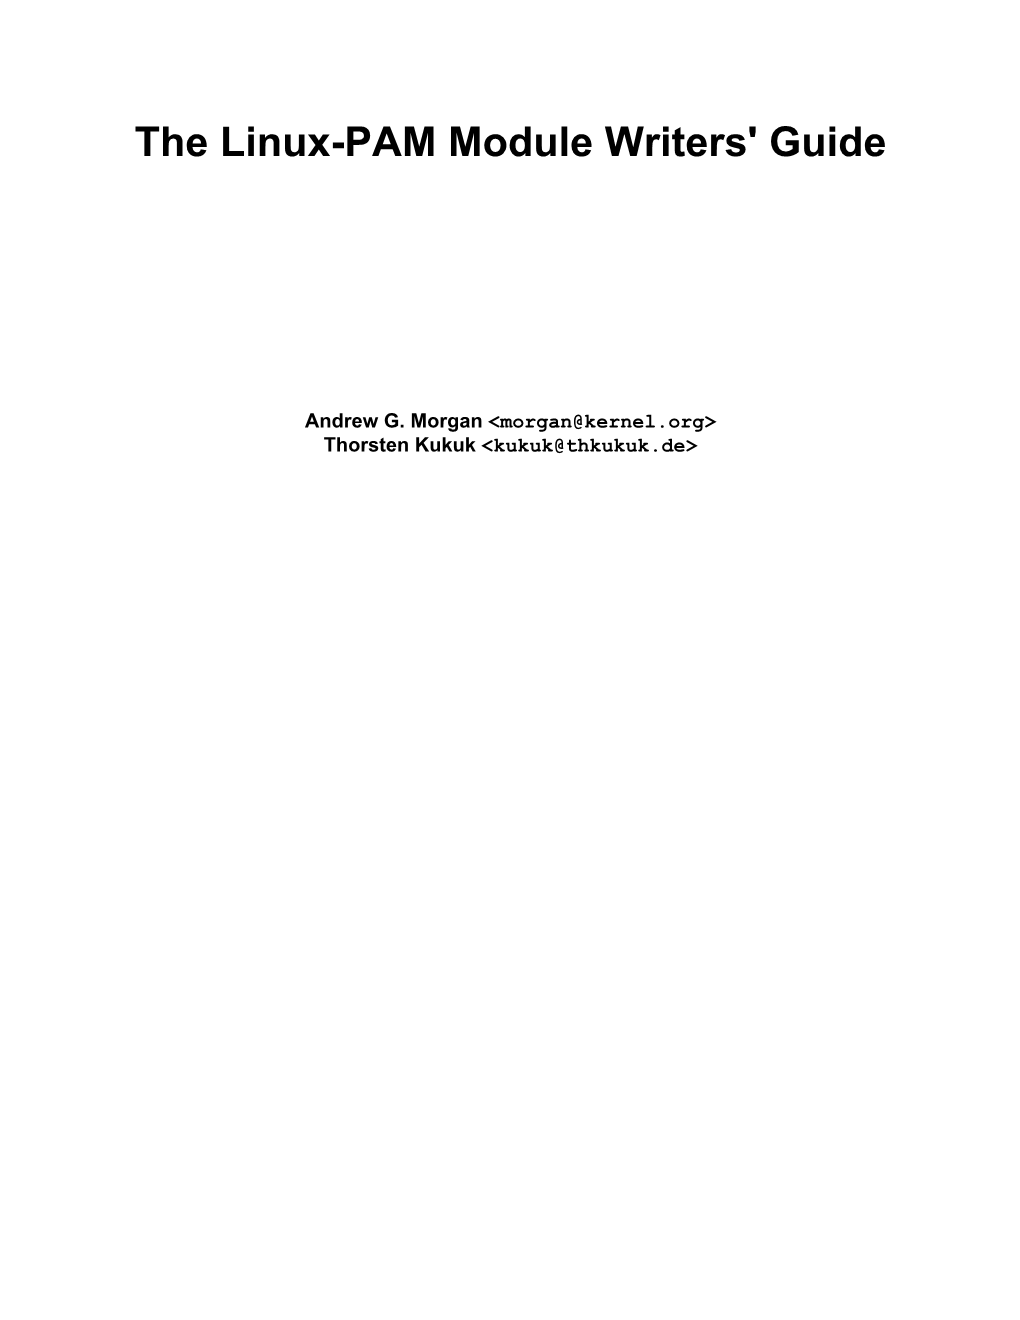 The Linux-PAM Module Writers' Guide